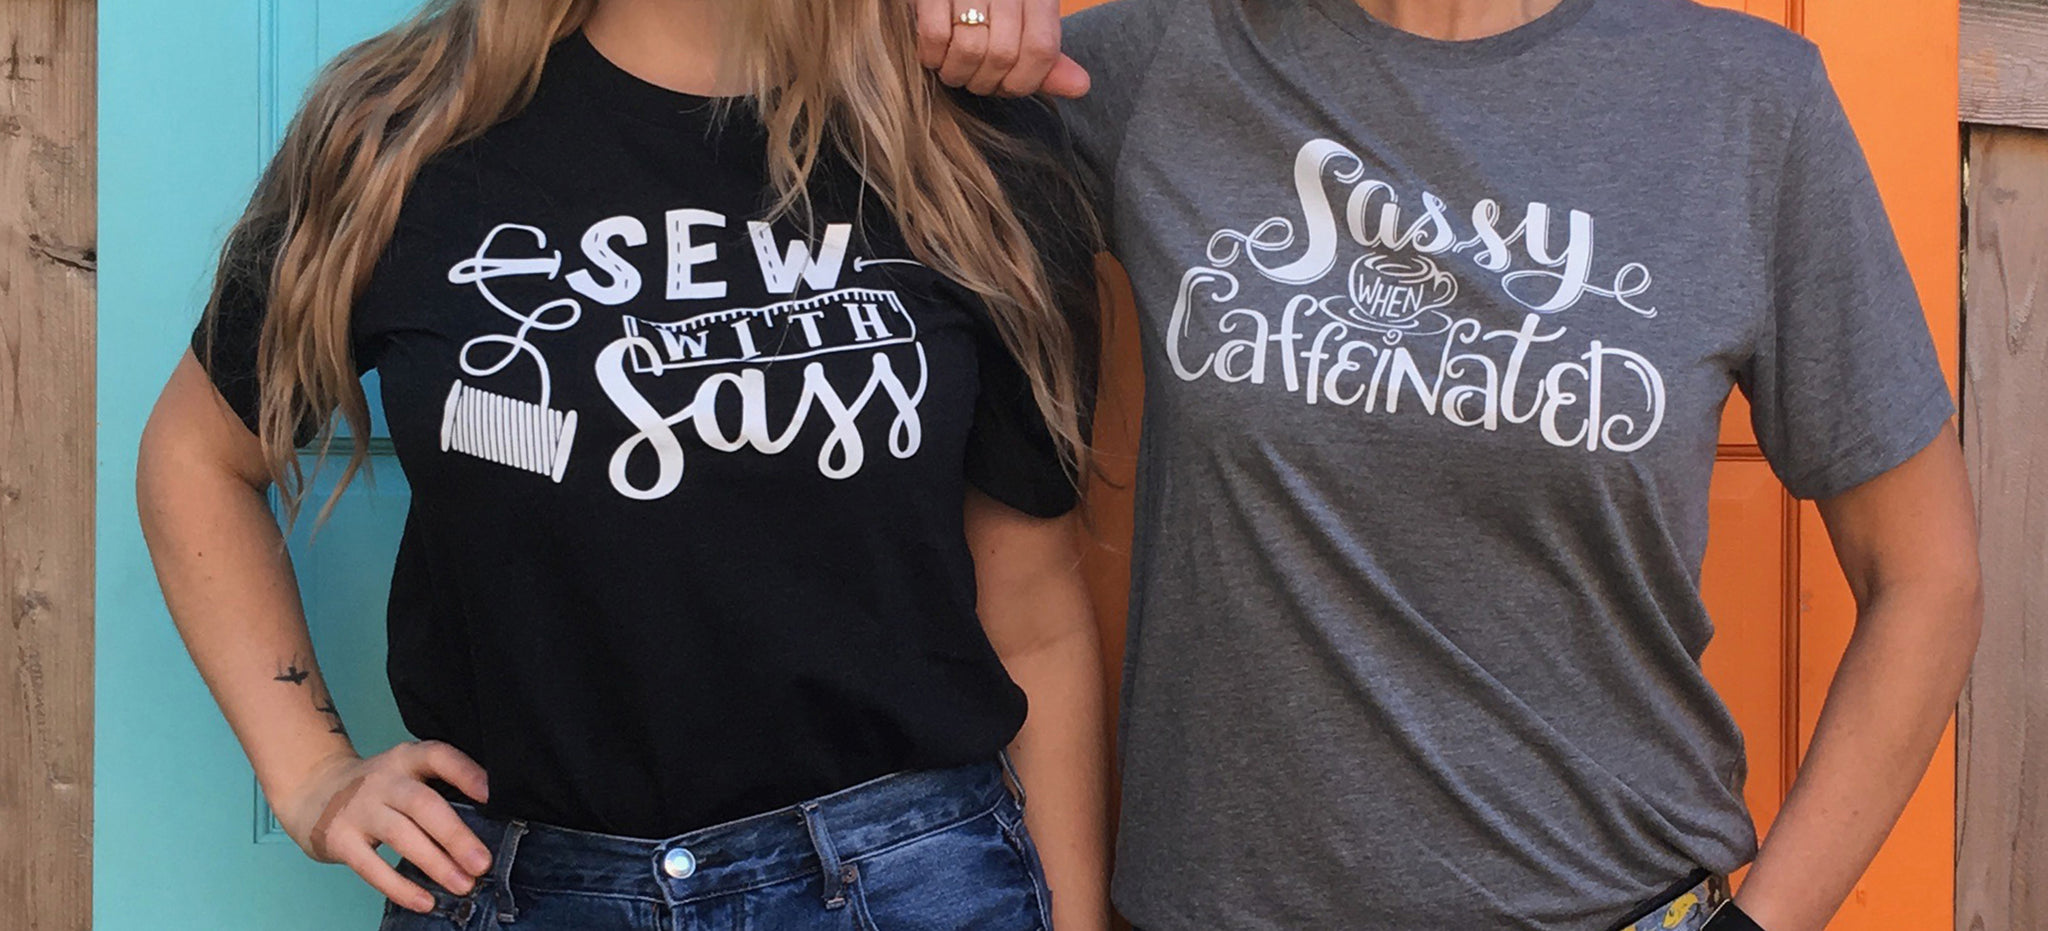 New Sassy T-Shirts + Pre-Order Sale!